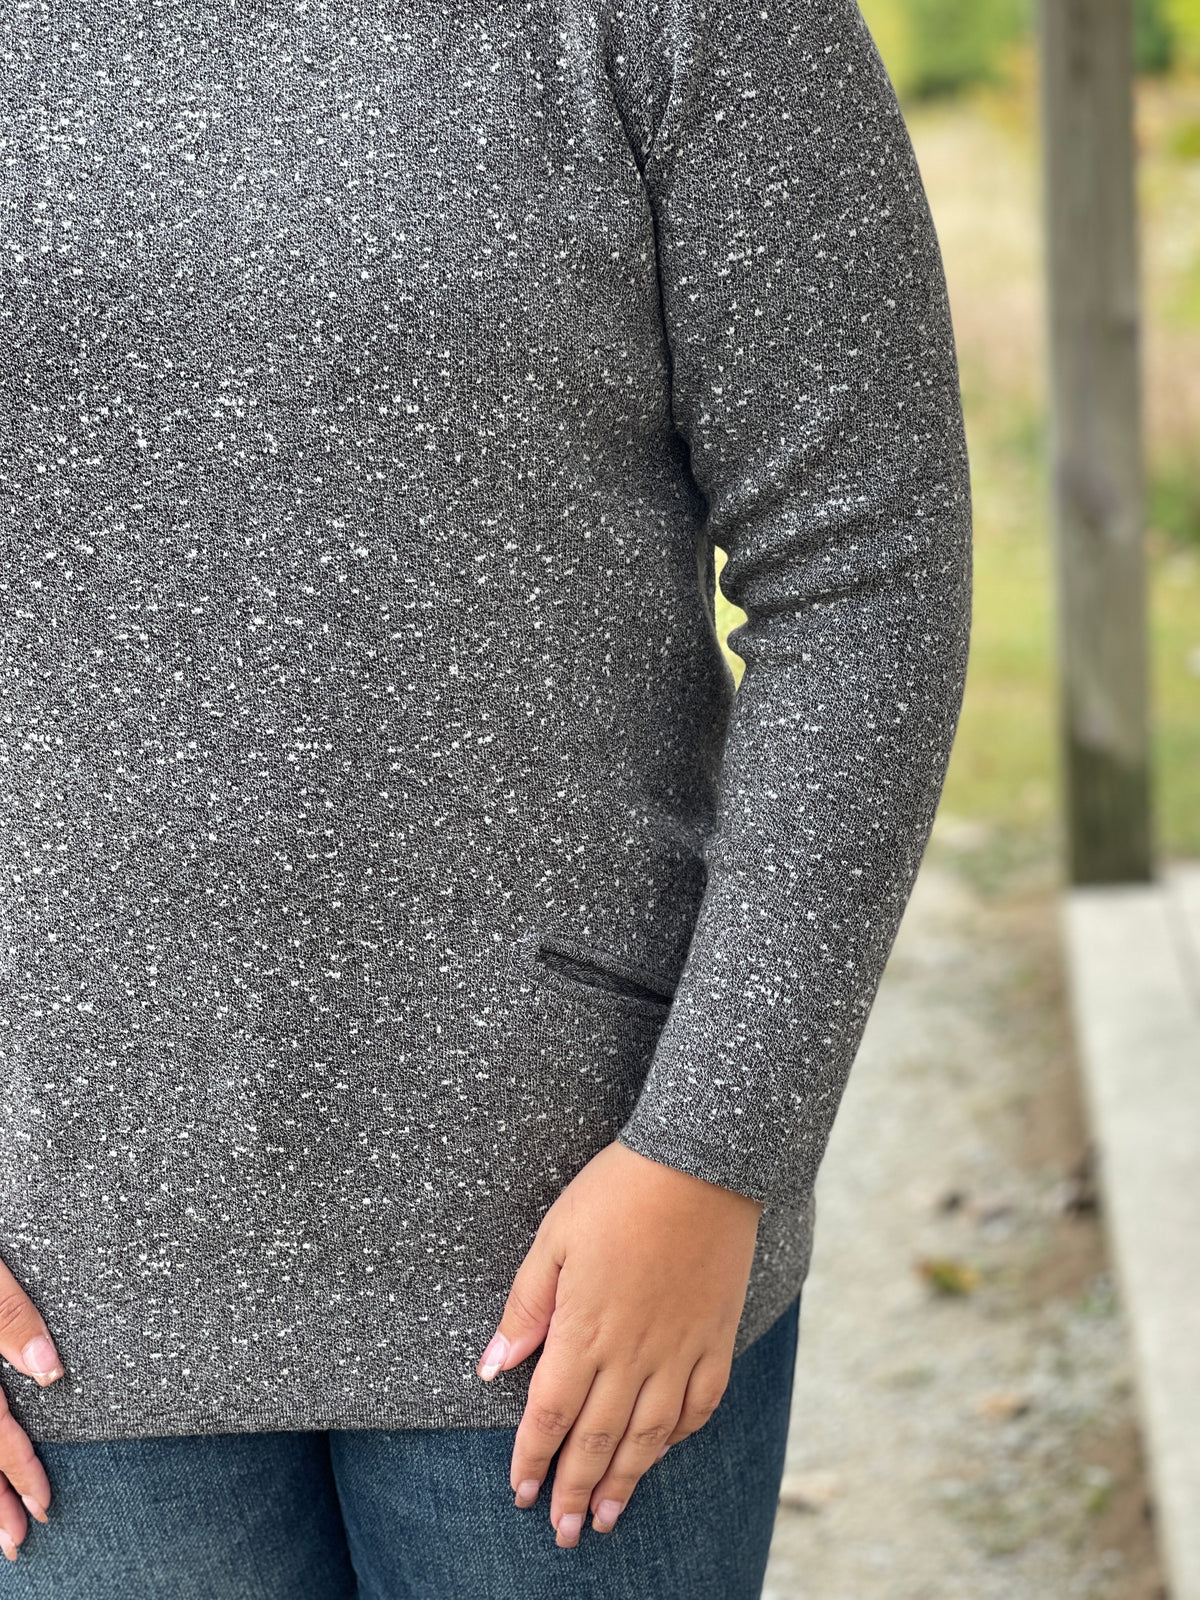 GREY/WHITE SPECKLE AND SHINE SWEATER